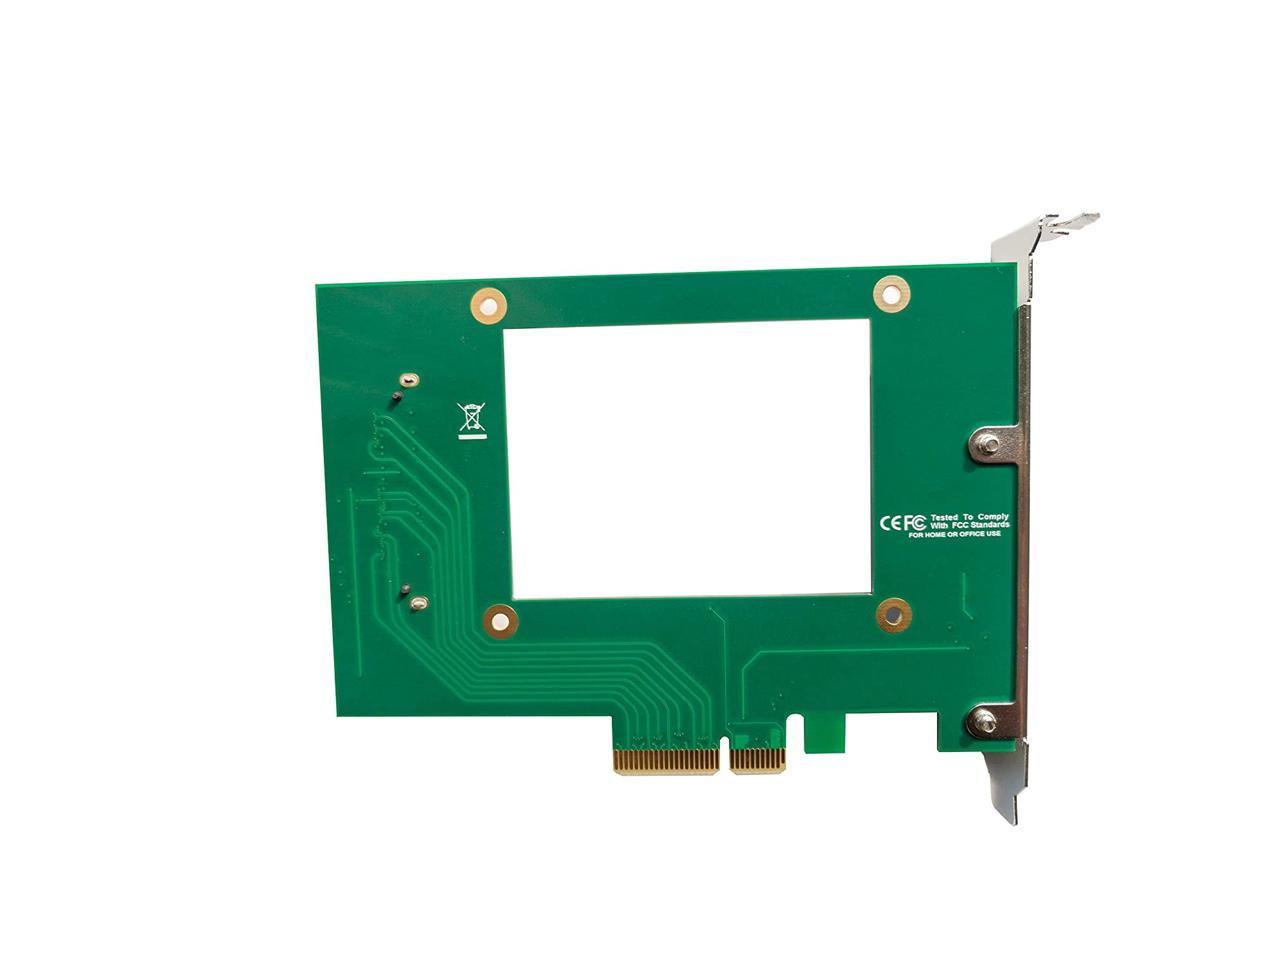 Dilinker U.2 to PCIe Adapter - x4 PCIe - for 2.5